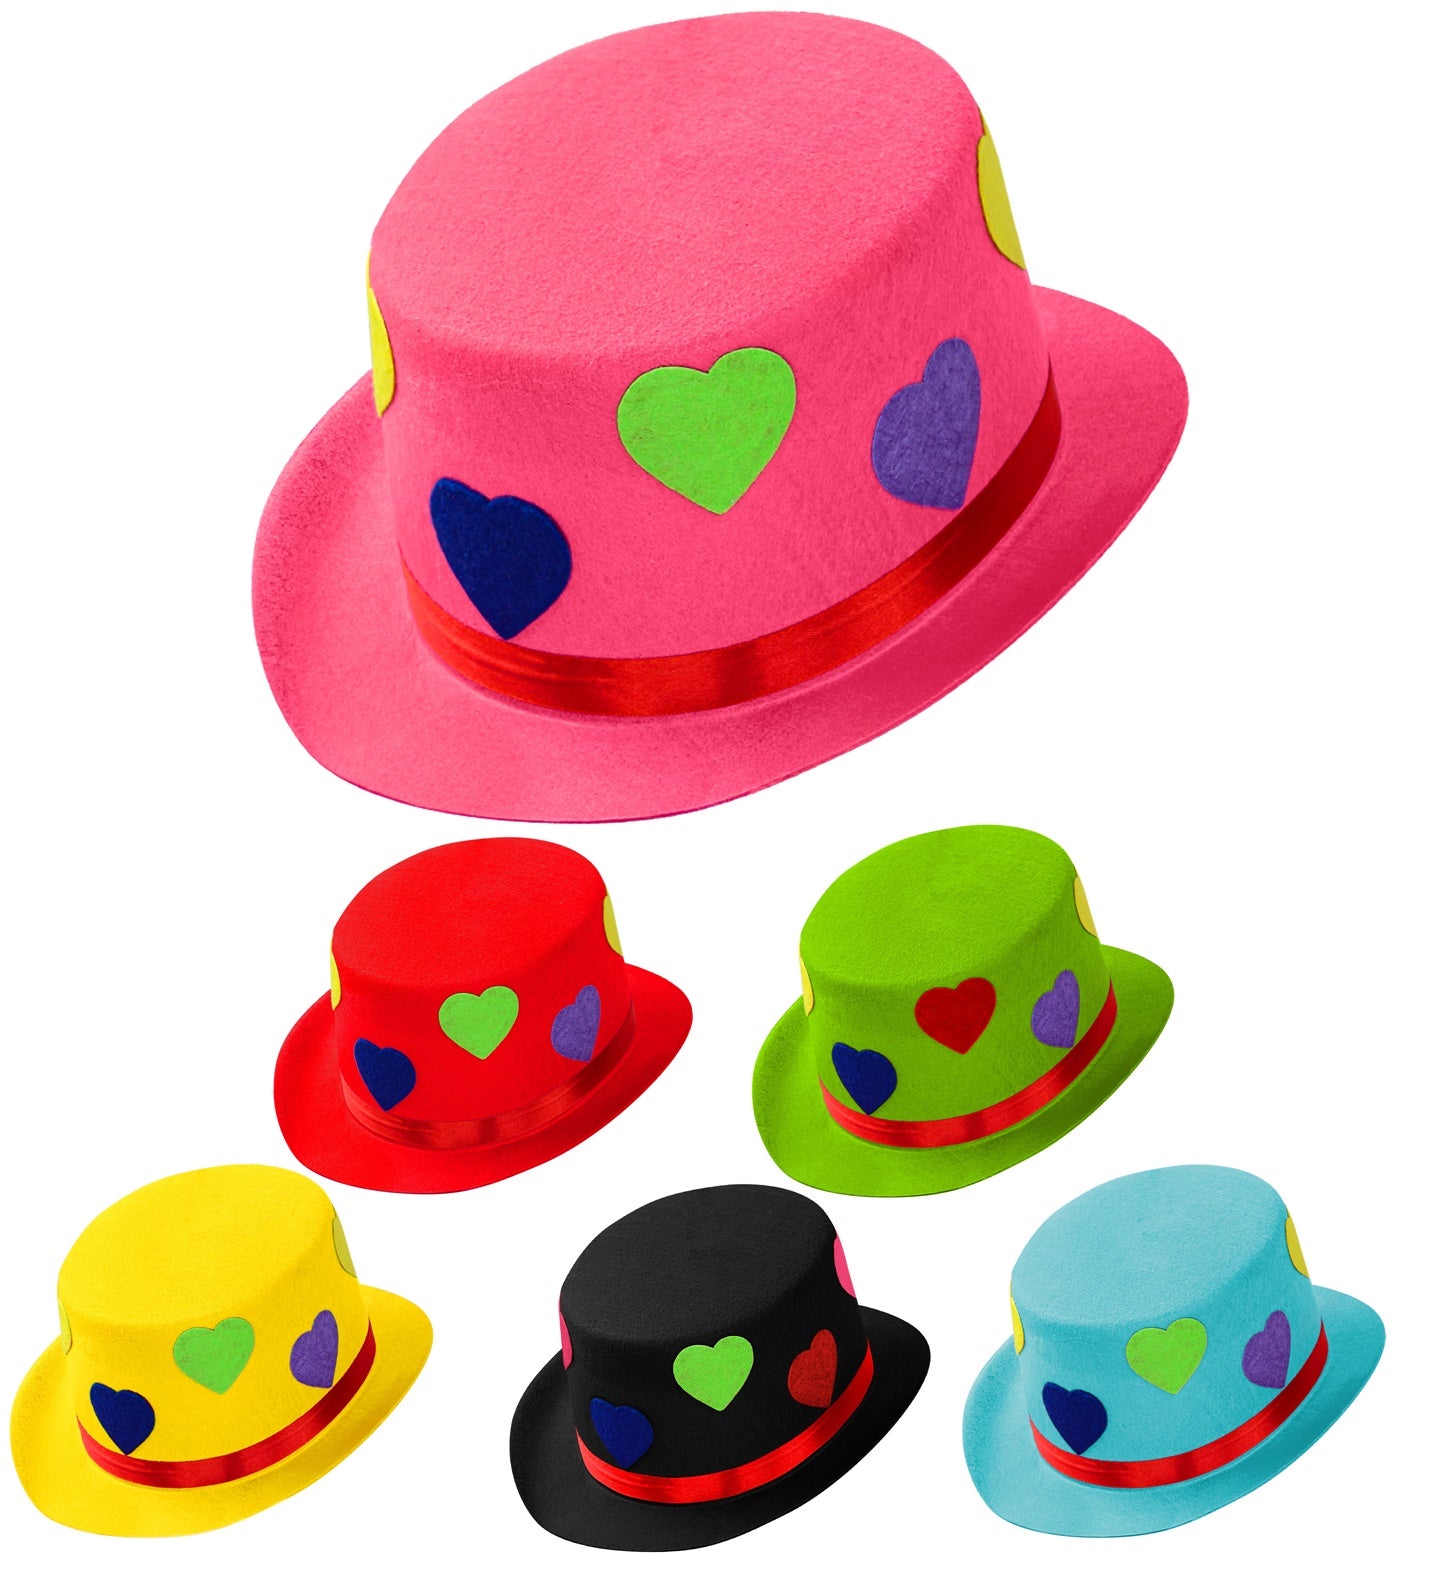 Clown Felt Top Hat With Hearts